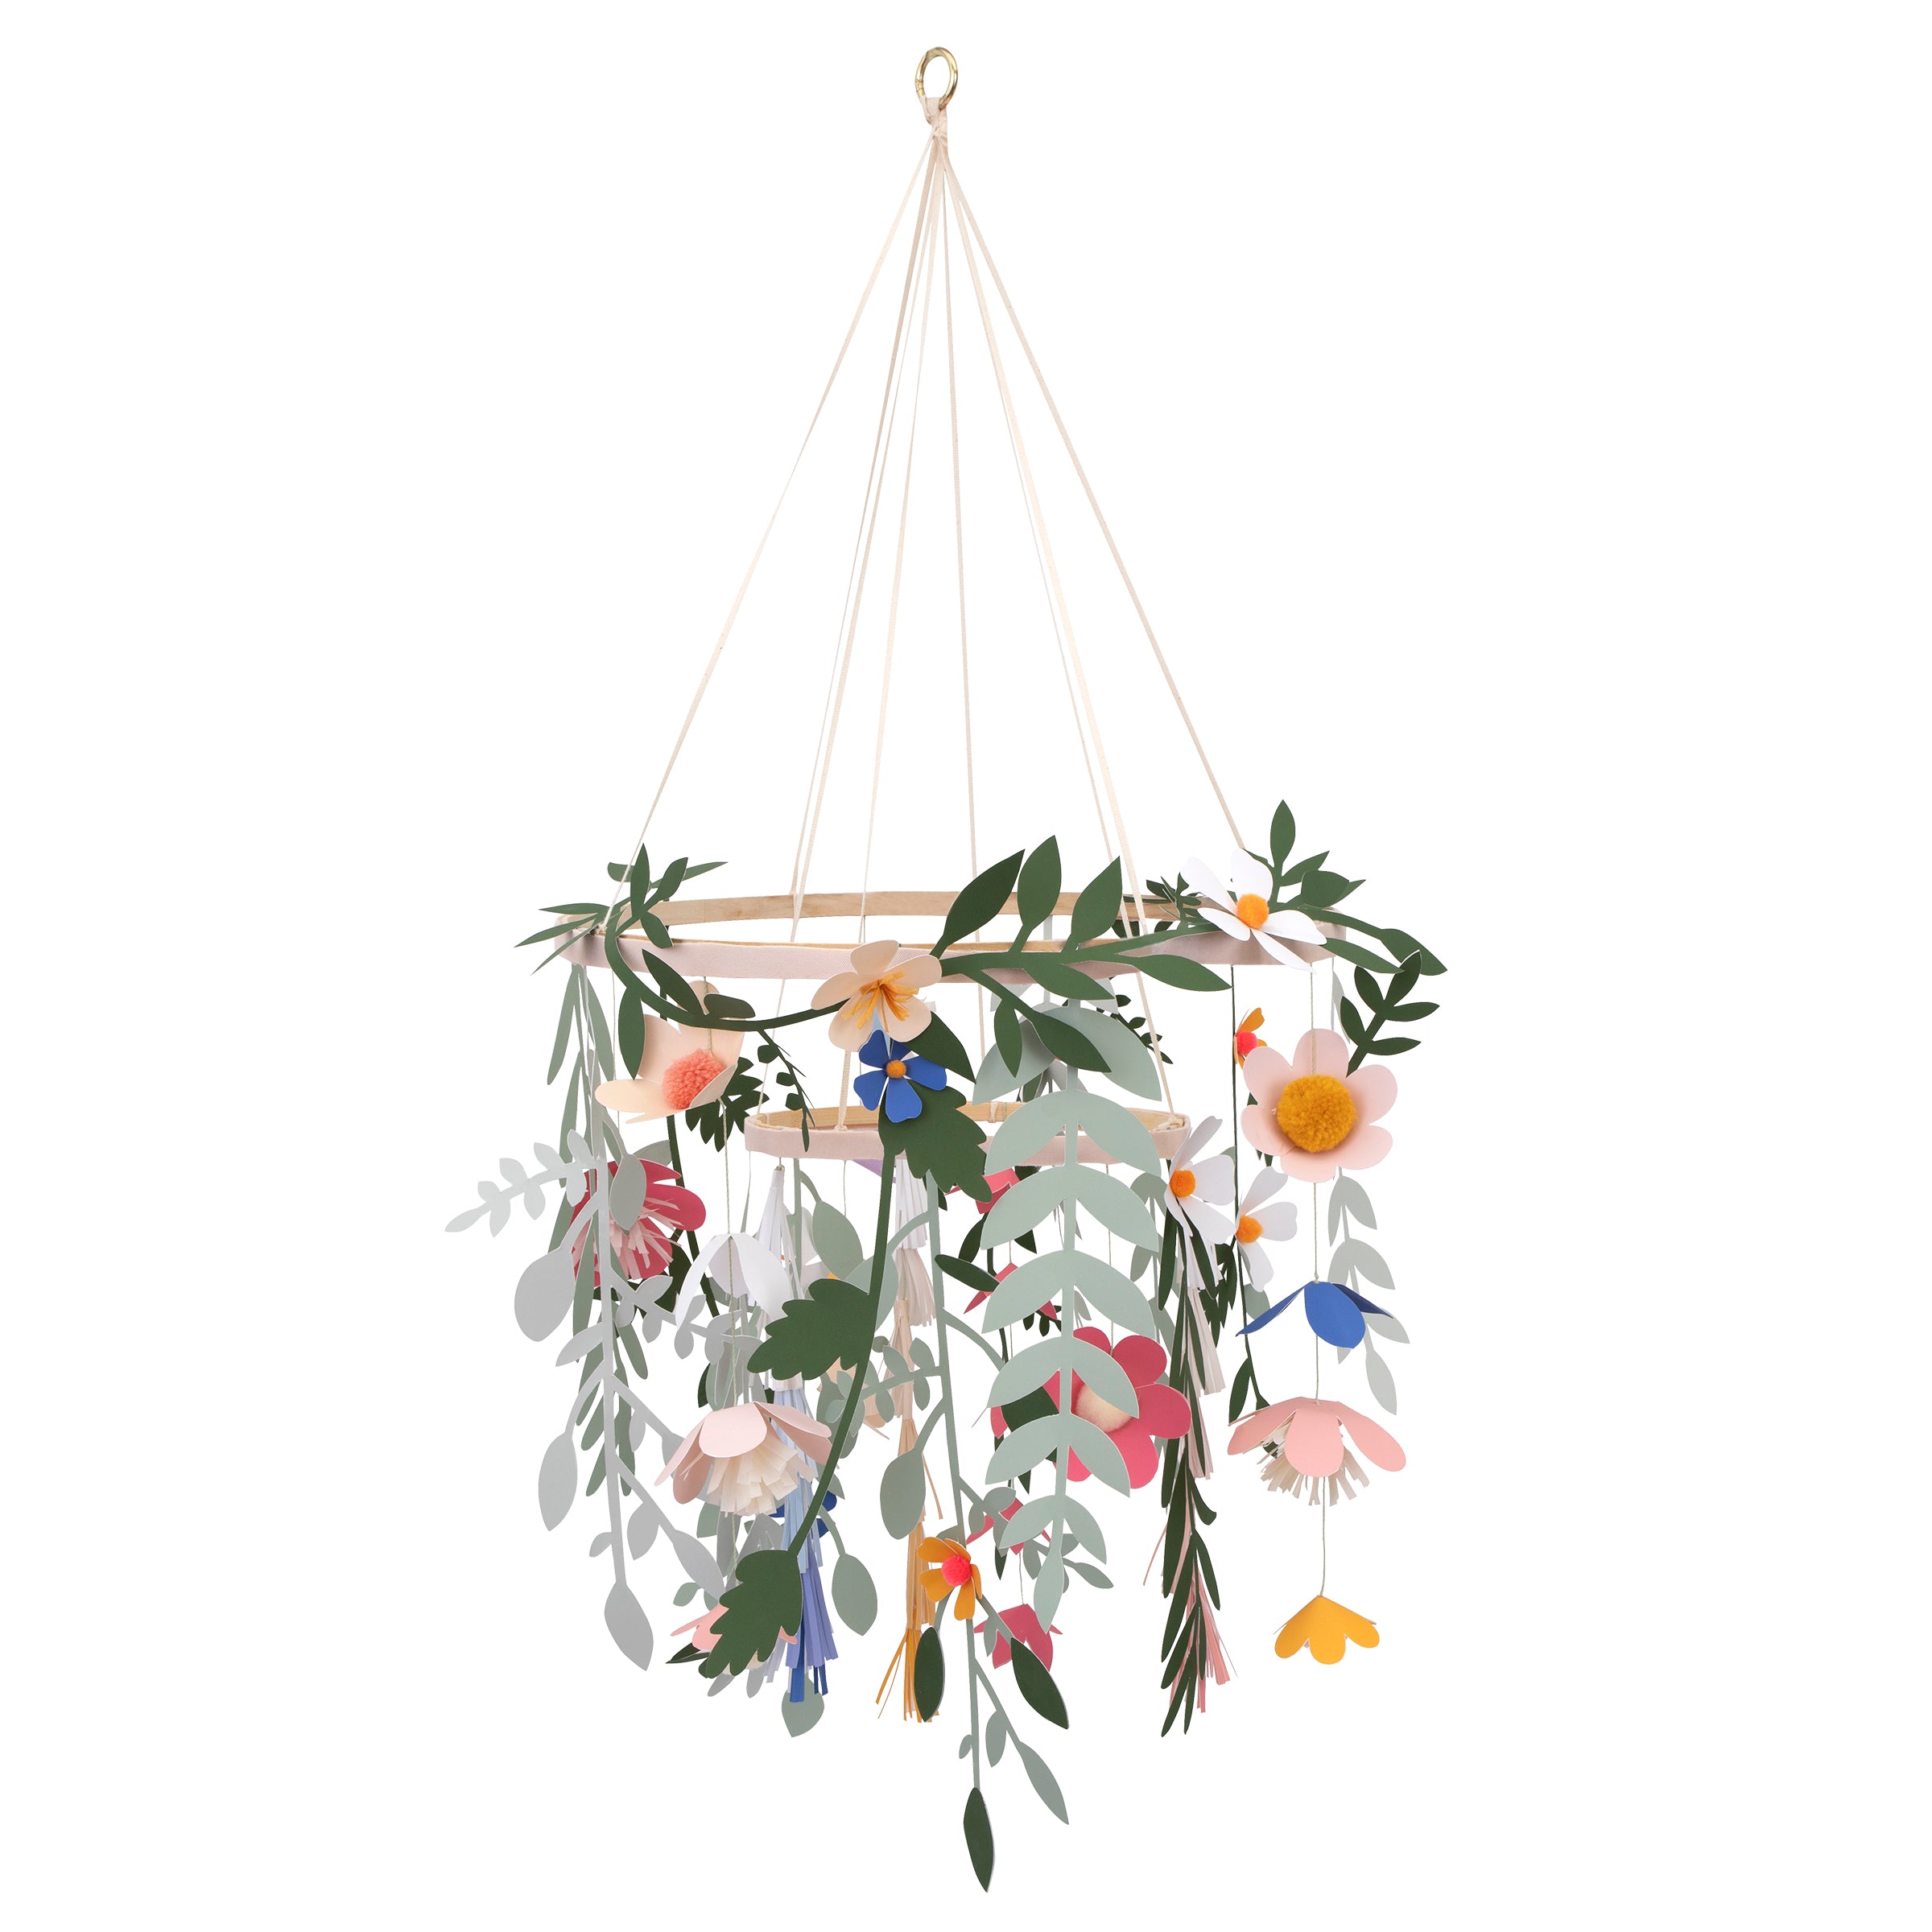 Our beautiful paper chandelier is crafted from paper flowers and leaves and wooden hoops.